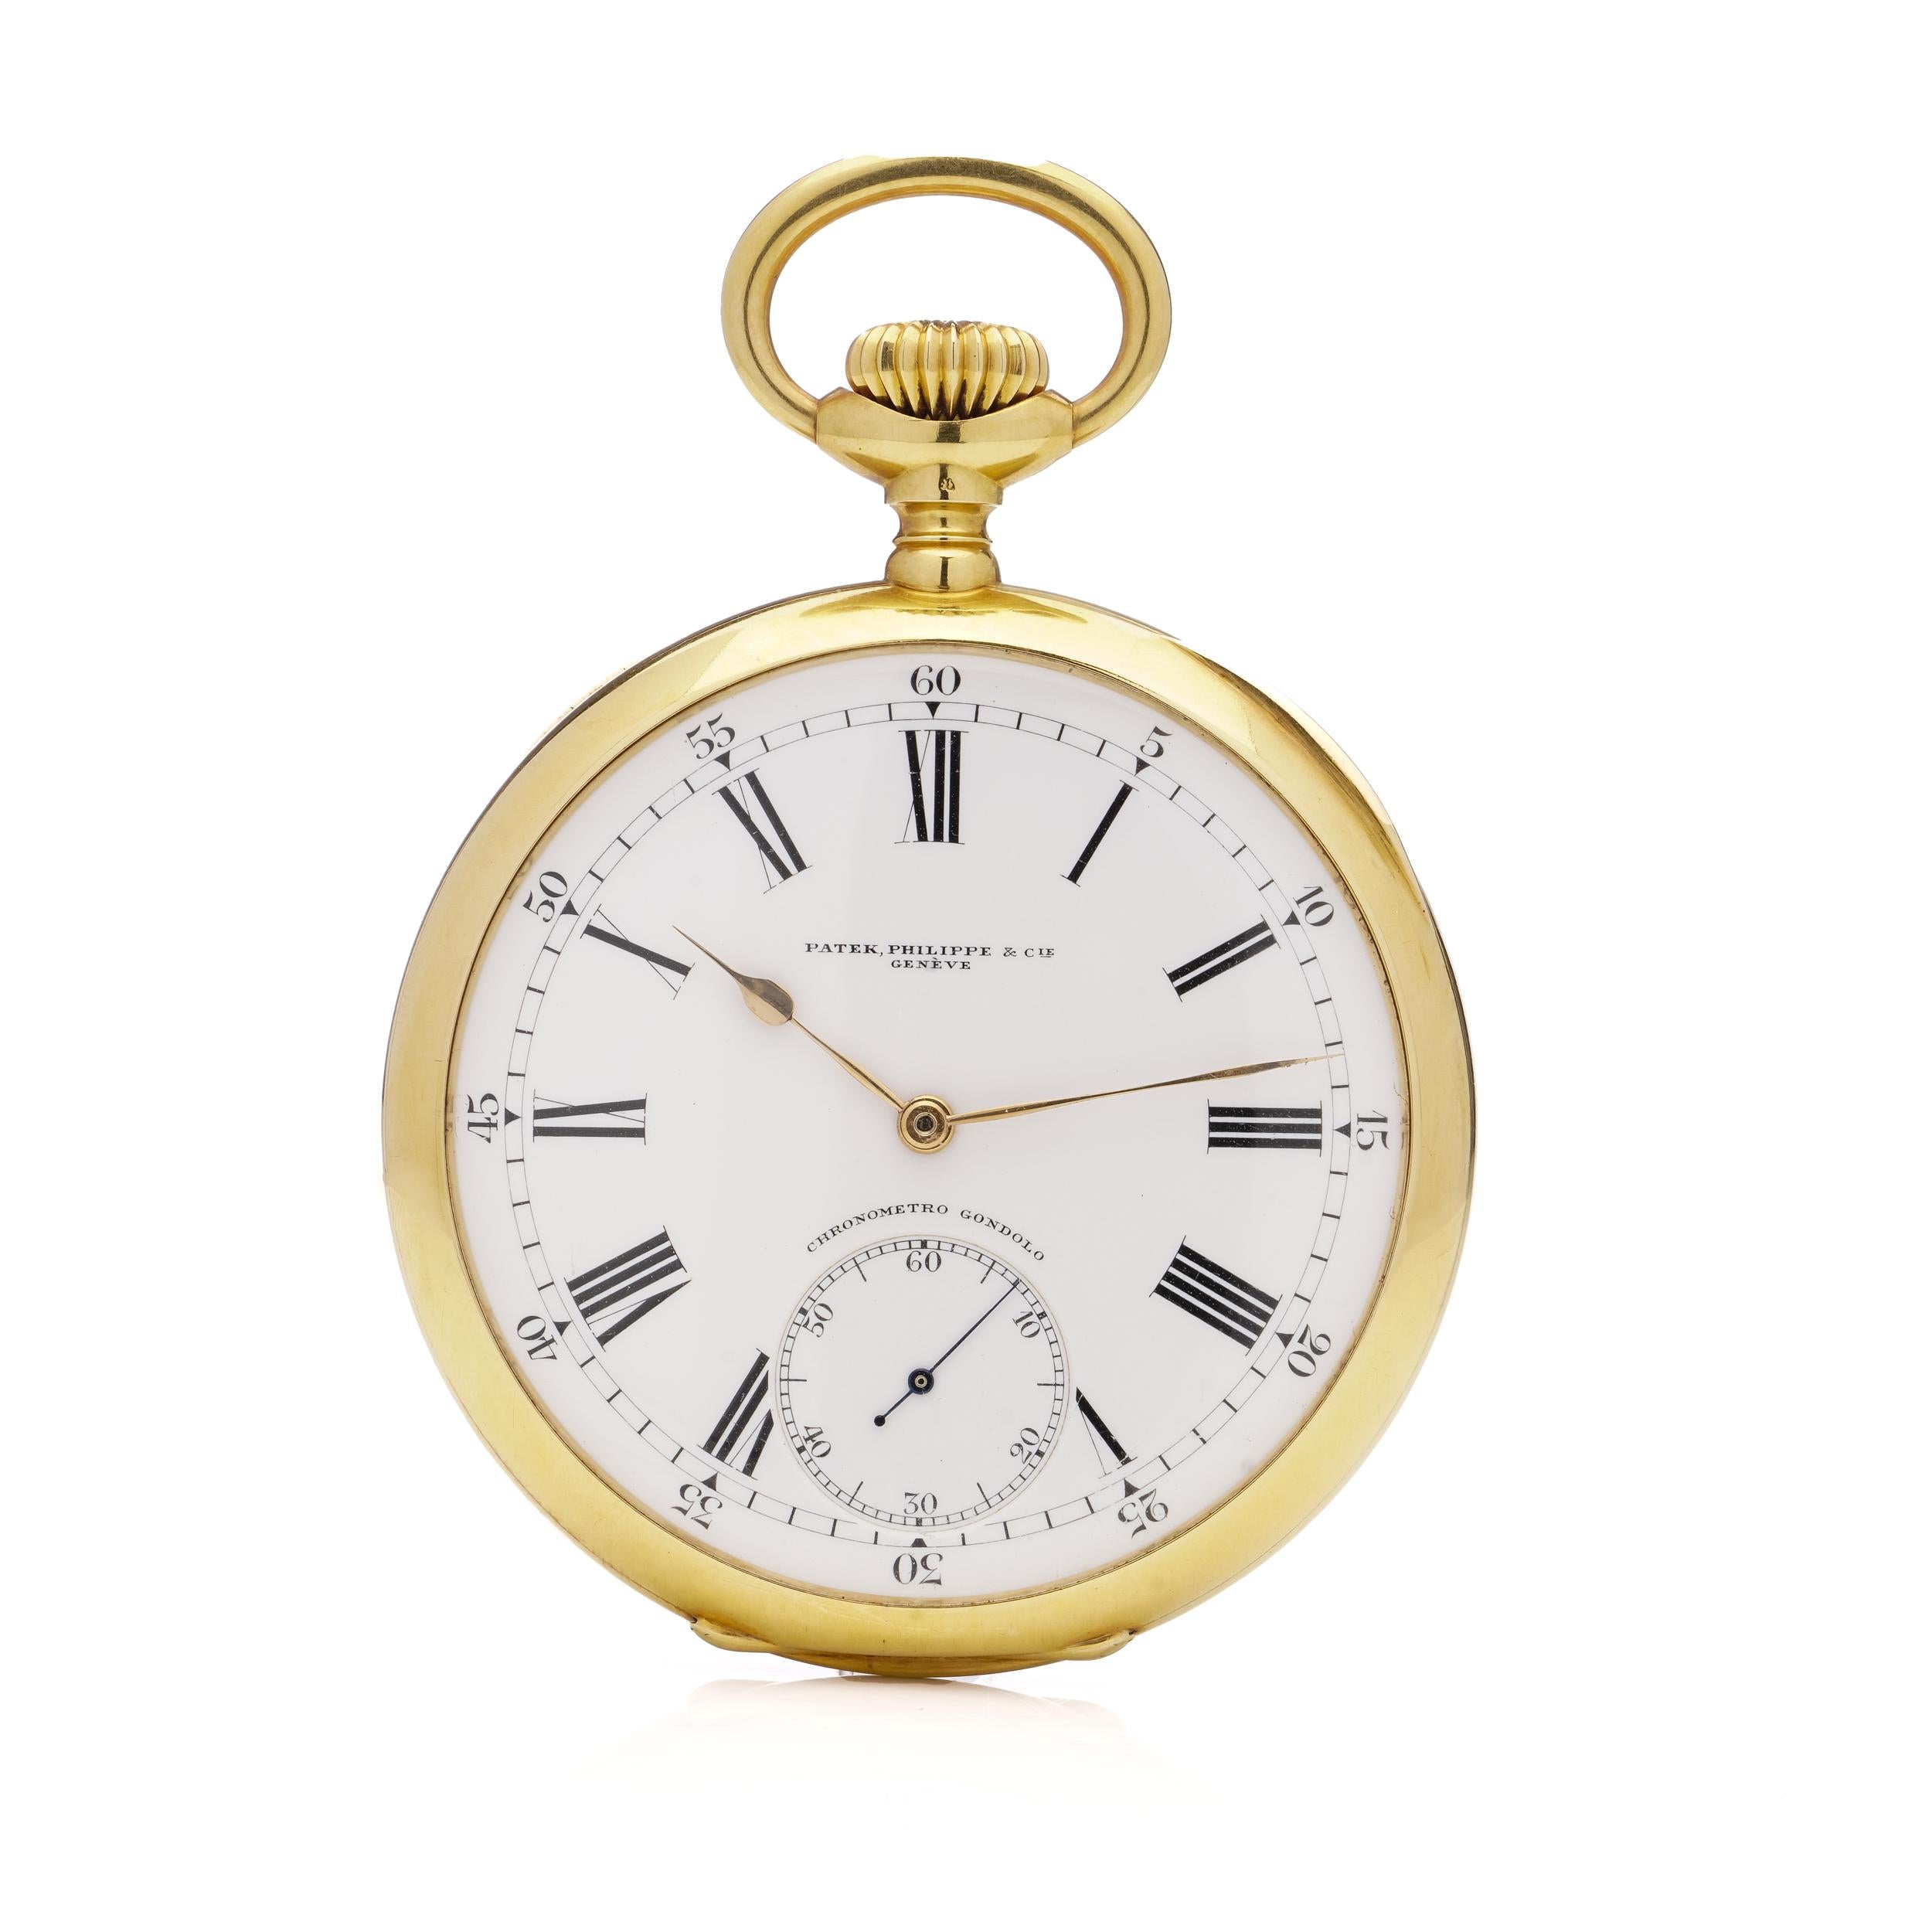 Patek Philippe 18kt. yellow gold Gondolo open-face pocket watch.
Made in Switzerland, Circa 1900's

Dial has been signed Patek Philippe & Co. Genève with a sub-second dial signed above Chronometro Gondolo with gold spade hands covered by a mineral